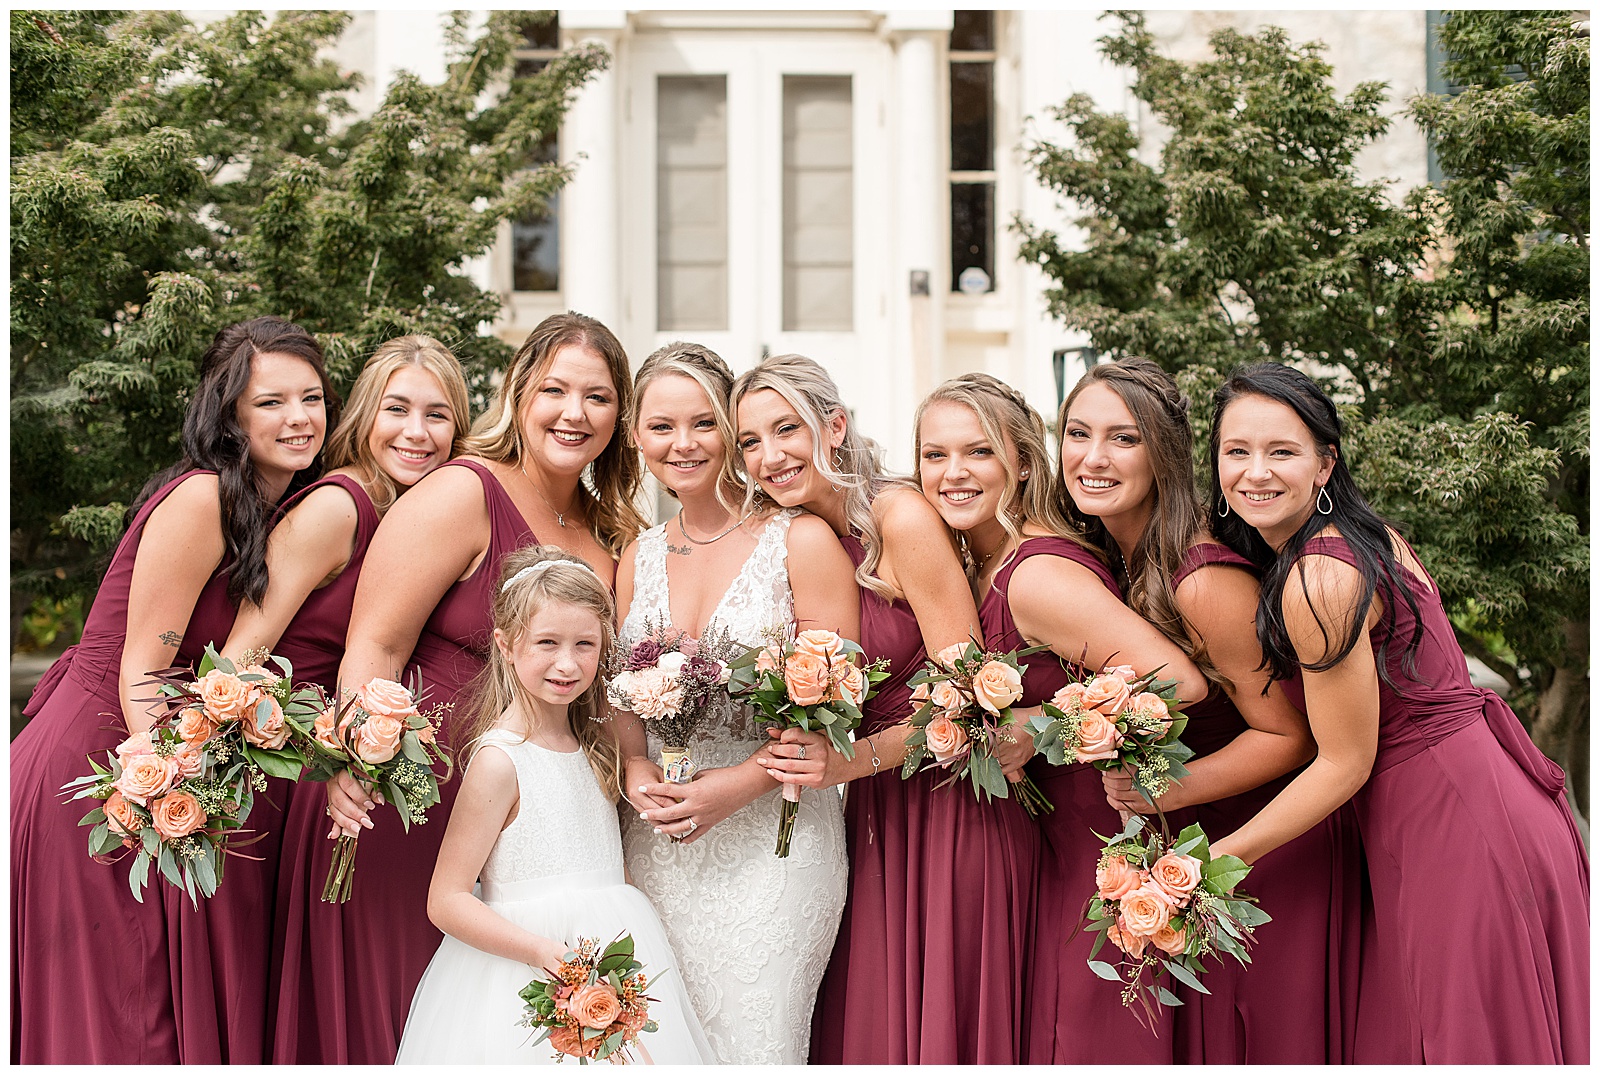 bride surrounded by her bridesmaids in maroon gowns and flower girl all holding bouquets outside white building